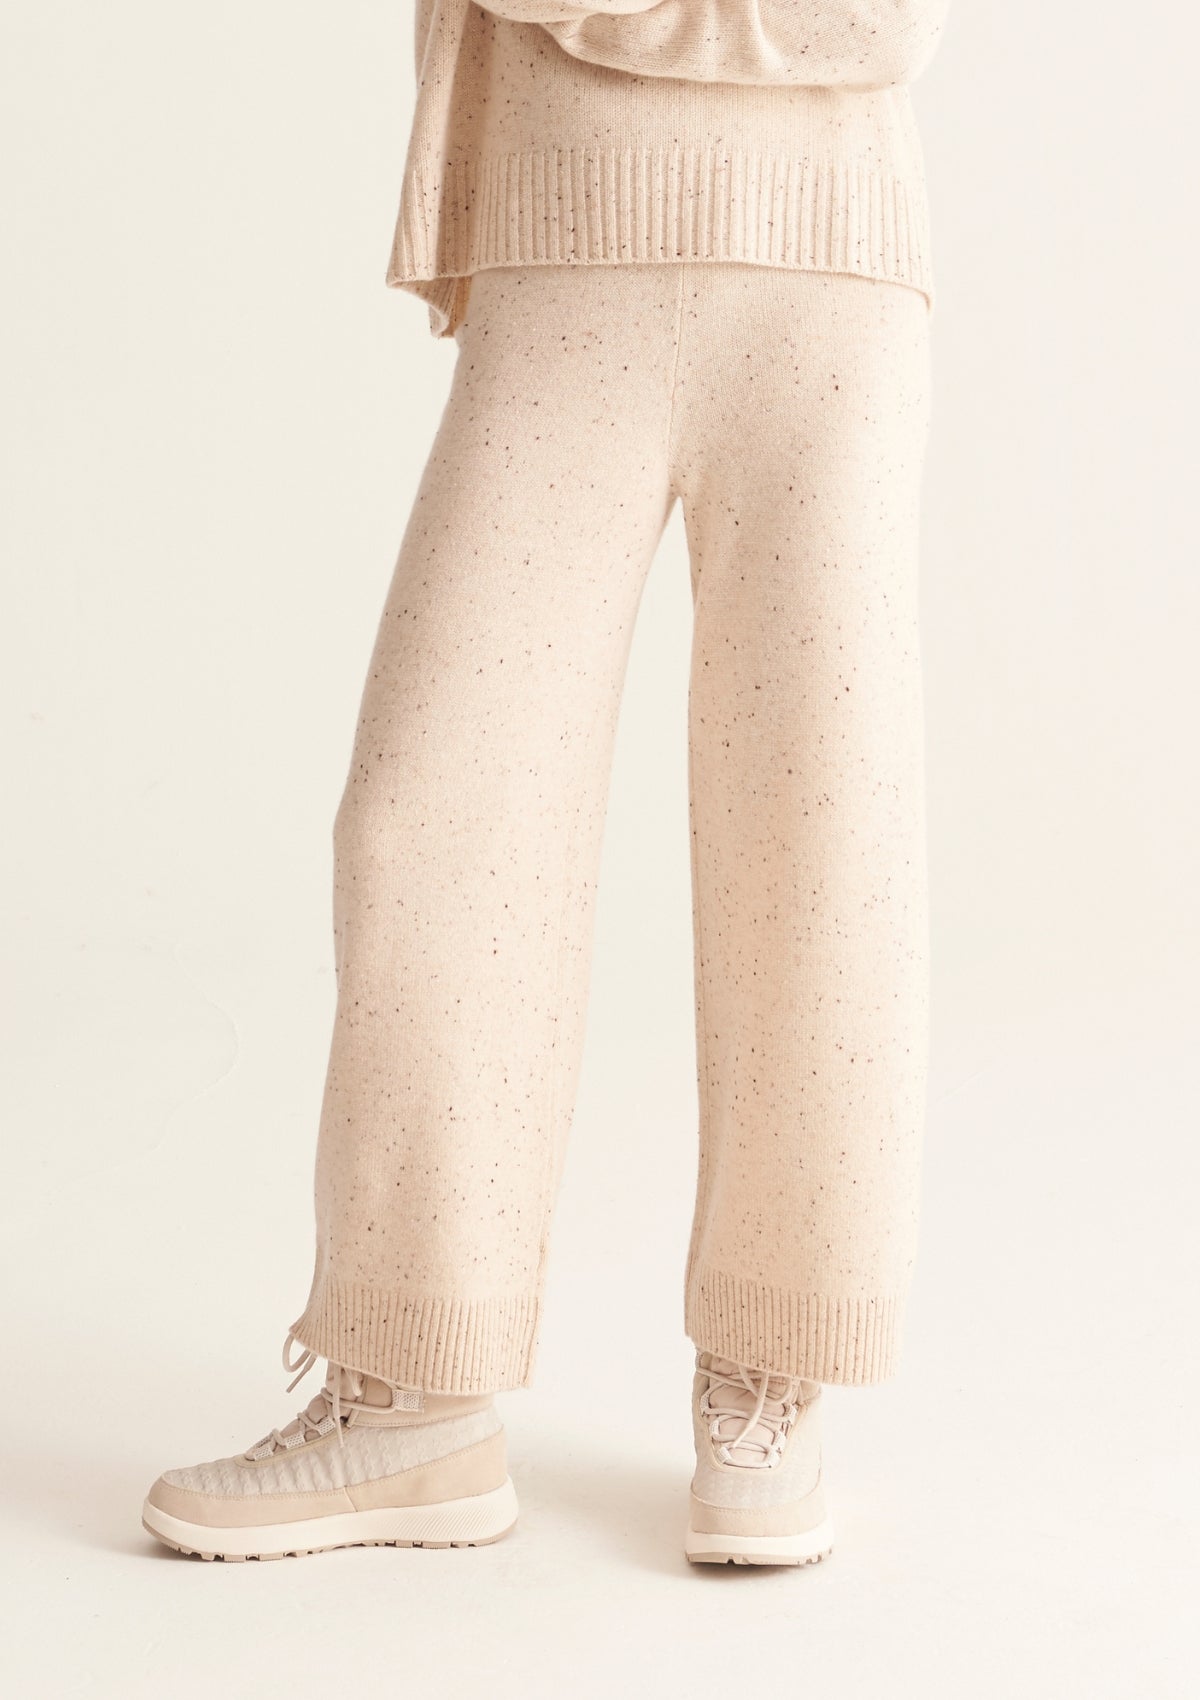 Donegal Knit Trousers in Marble White